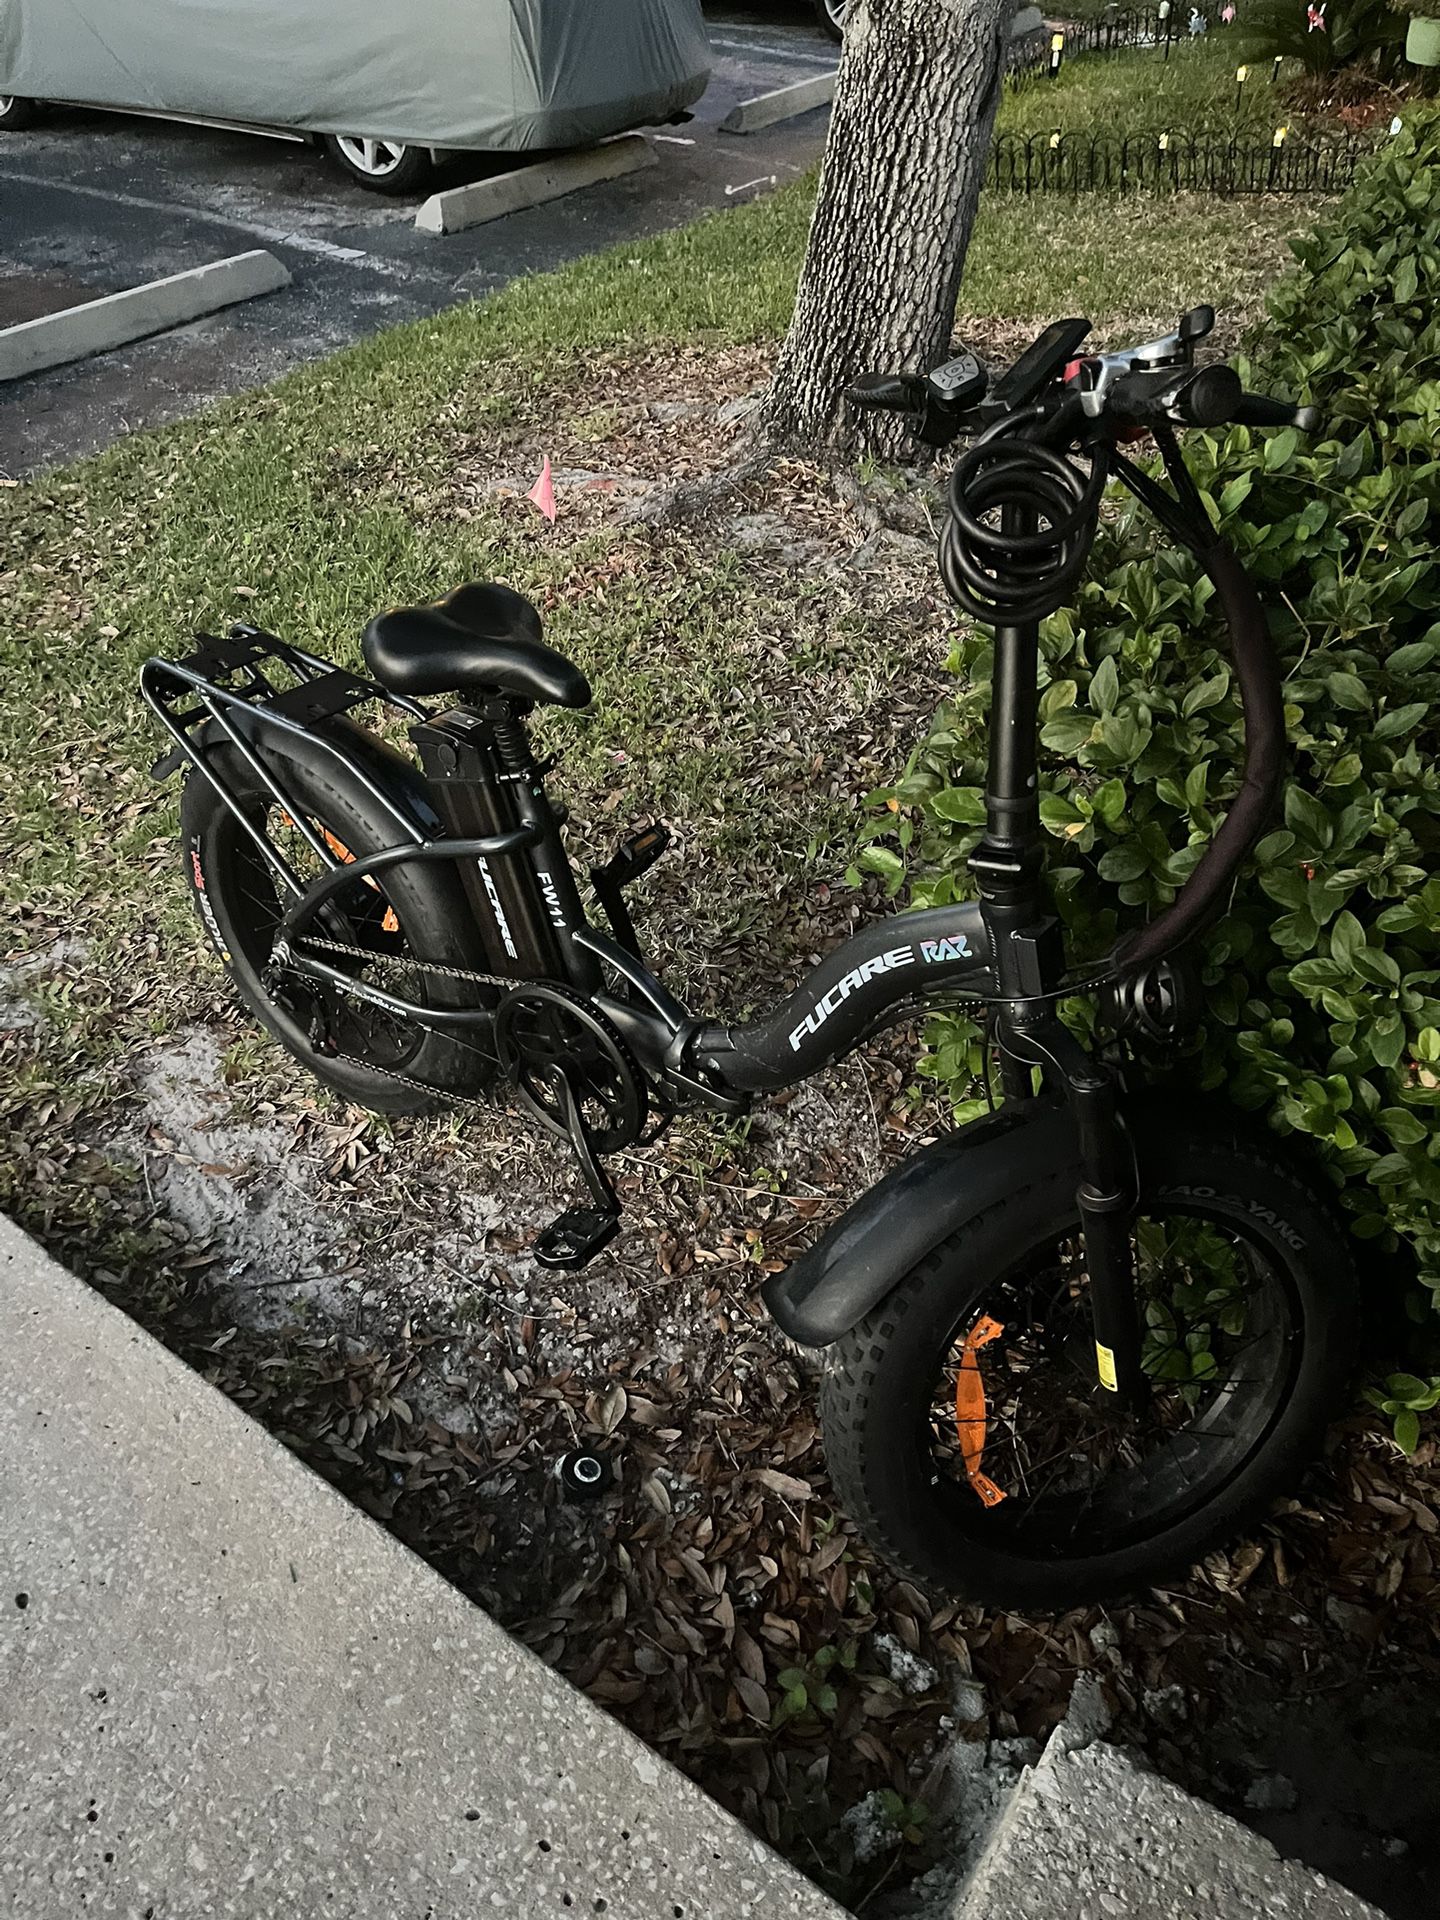 Fucare Electric E Bike For Sell And Trade For A 27.5 Or 29  Se Bike